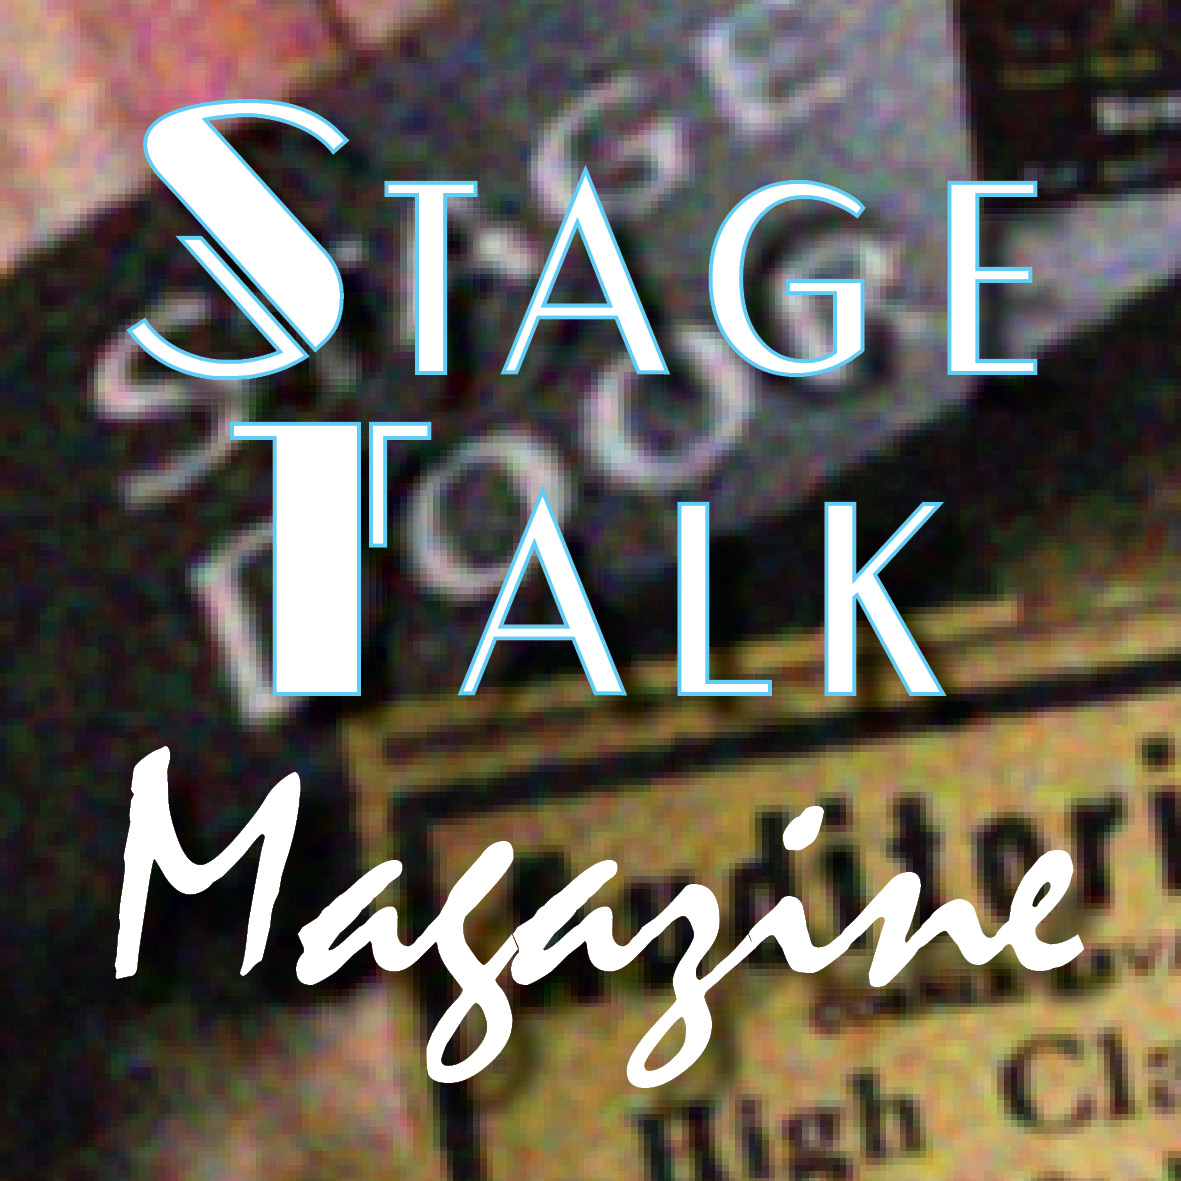 HAPPY BIRTHDAY TO US! StageTalk Magazine is 2 years old!